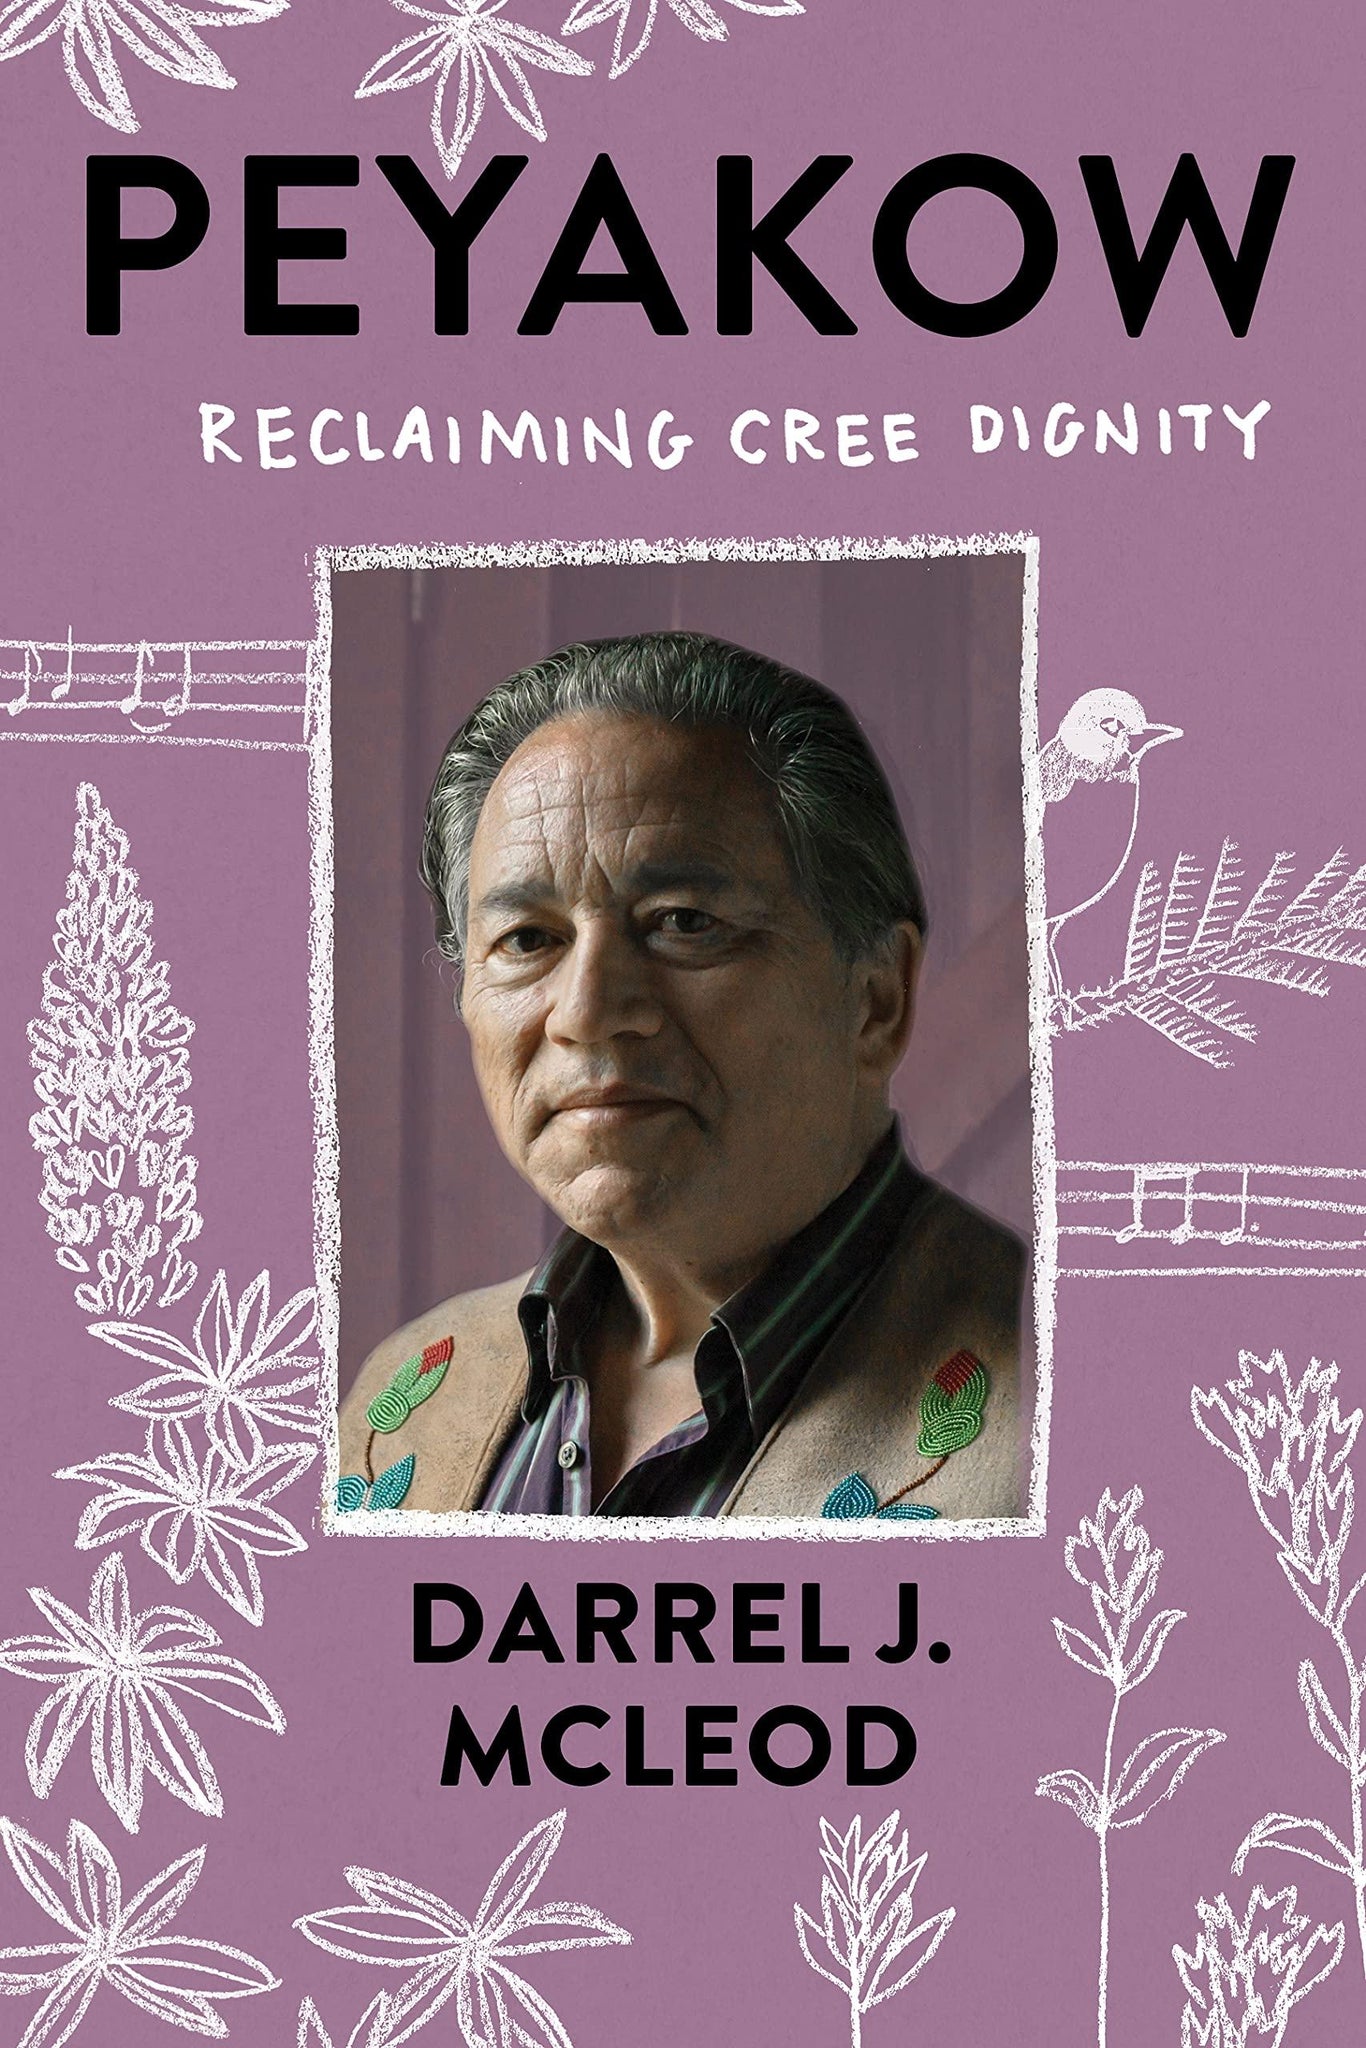 Peyakow: Reclaiming Cree Dignity - ShopQueer.co